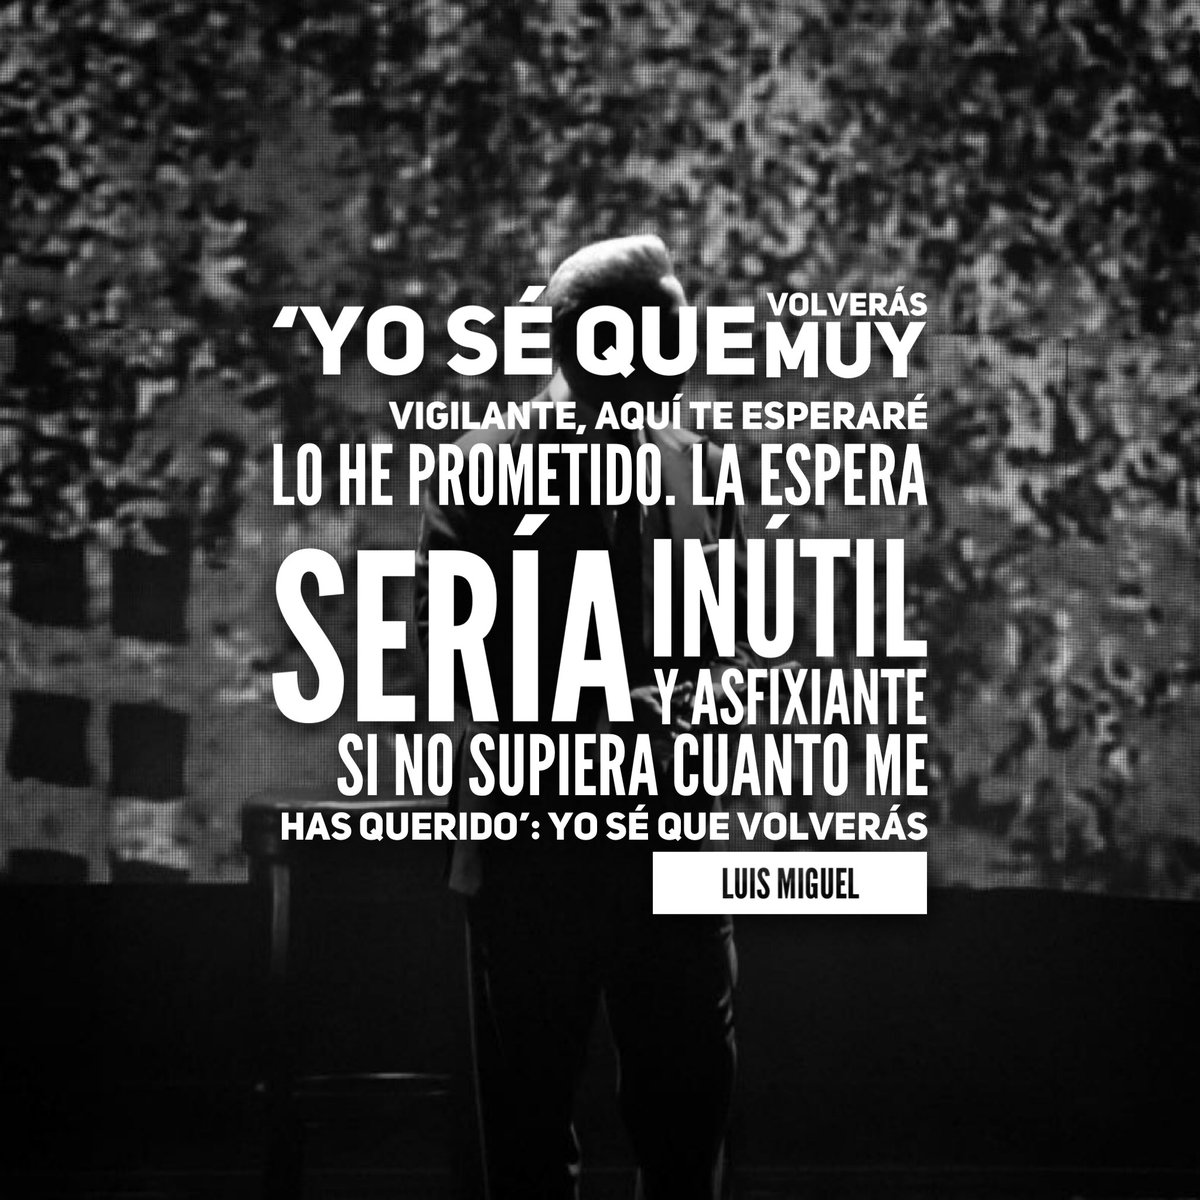 Total 92+ imagen frases canciones luis miguel - Thptletrongtan.edu.vn